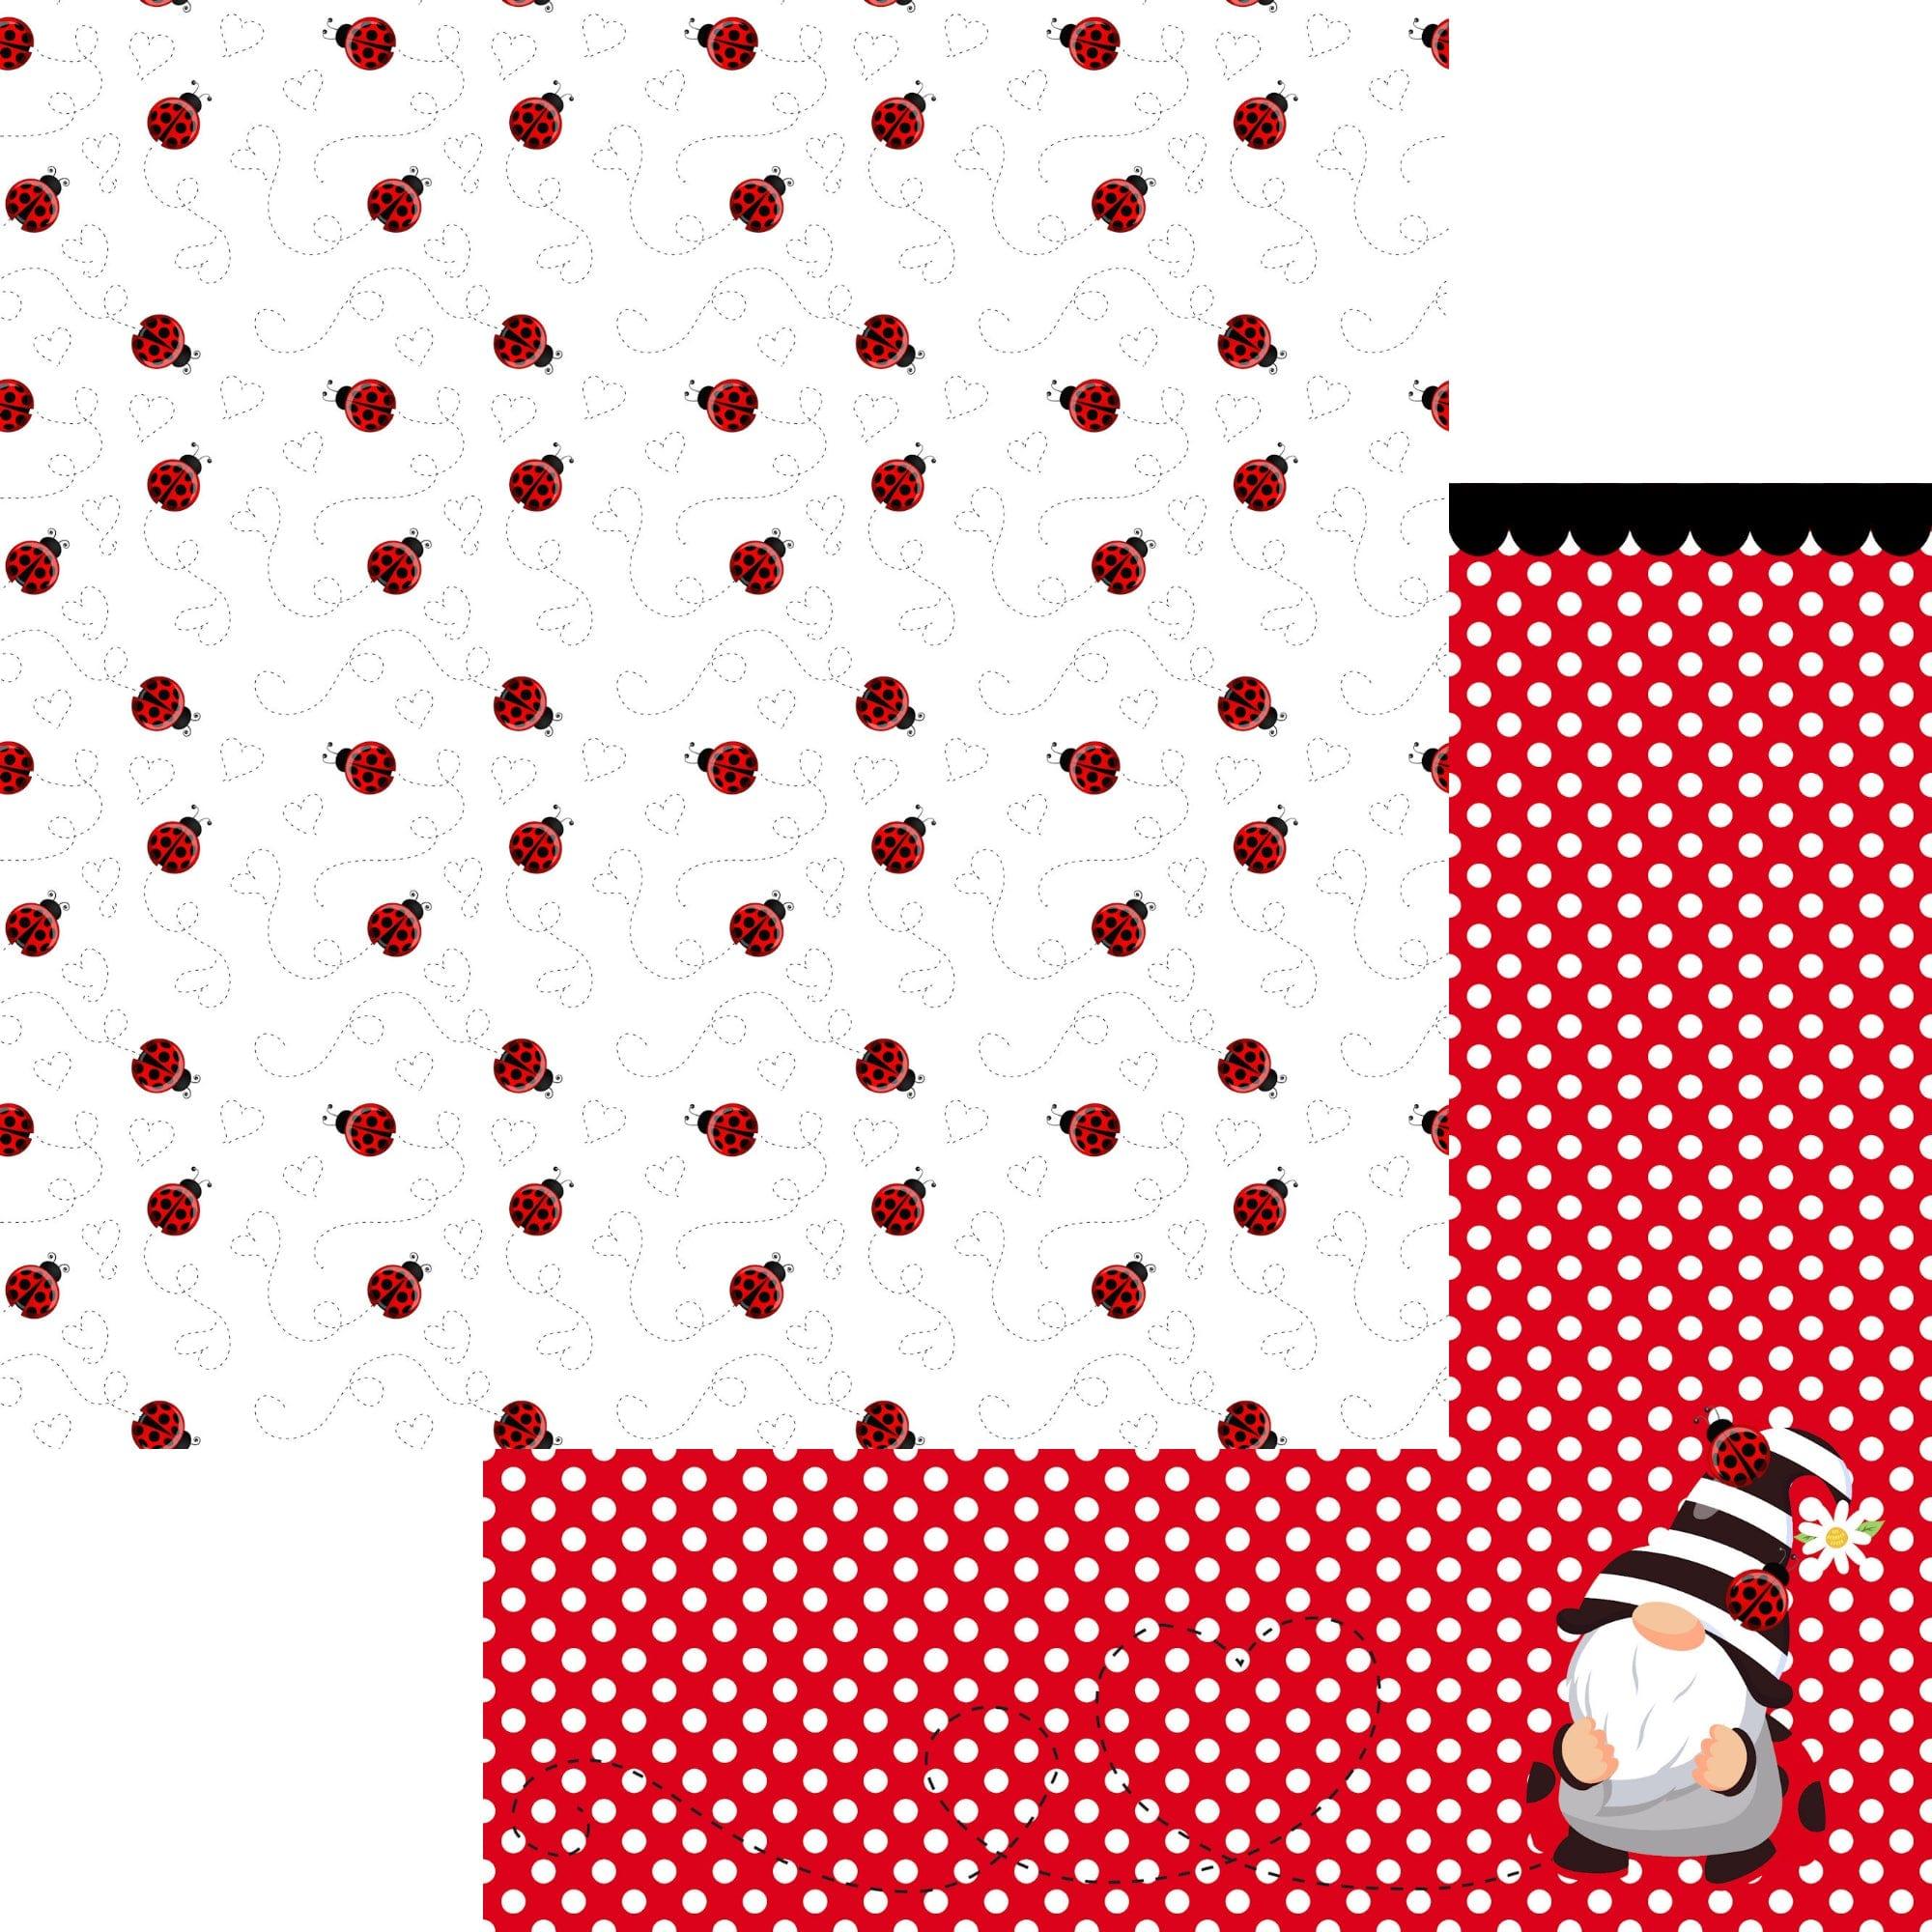 Ladybug Love Collection I Heart You 12 x 12 Double-Sided Scrapbook Paper by SSC Designs